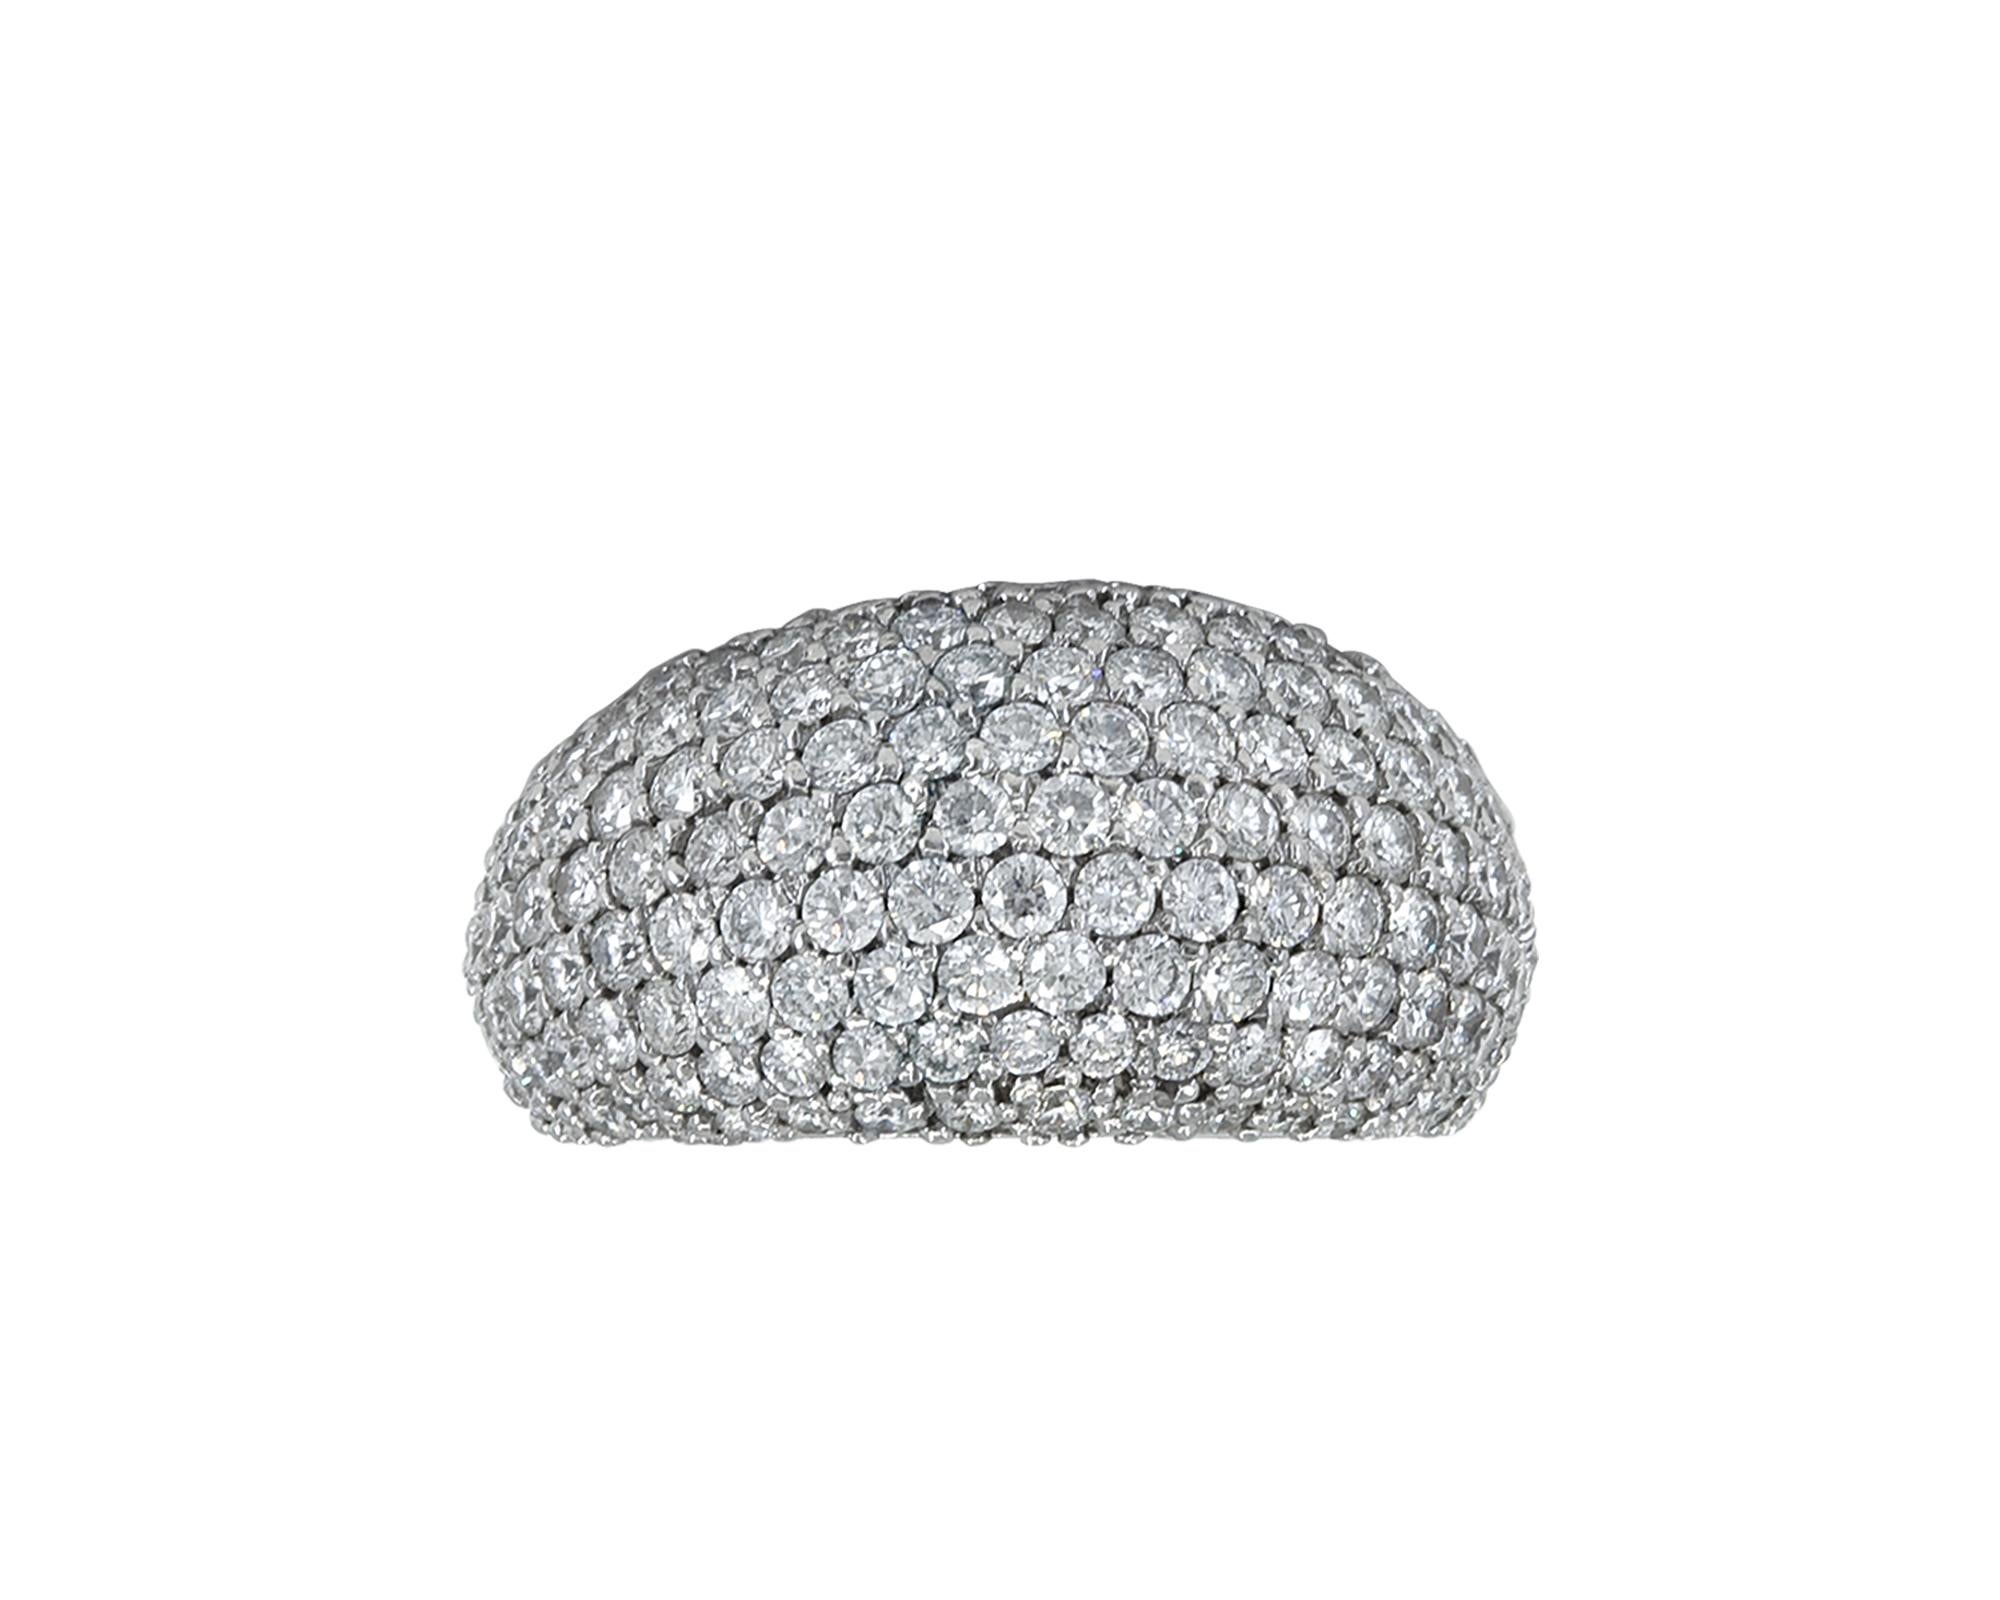 An elegant ring designed as a dome and embellished with 151 round diamonds. 
Total weight of diamonds is 5.30 carats.
The metal is 18k white gold. Gross weight 14.96 gr.
Size 7.5. Resizing available.